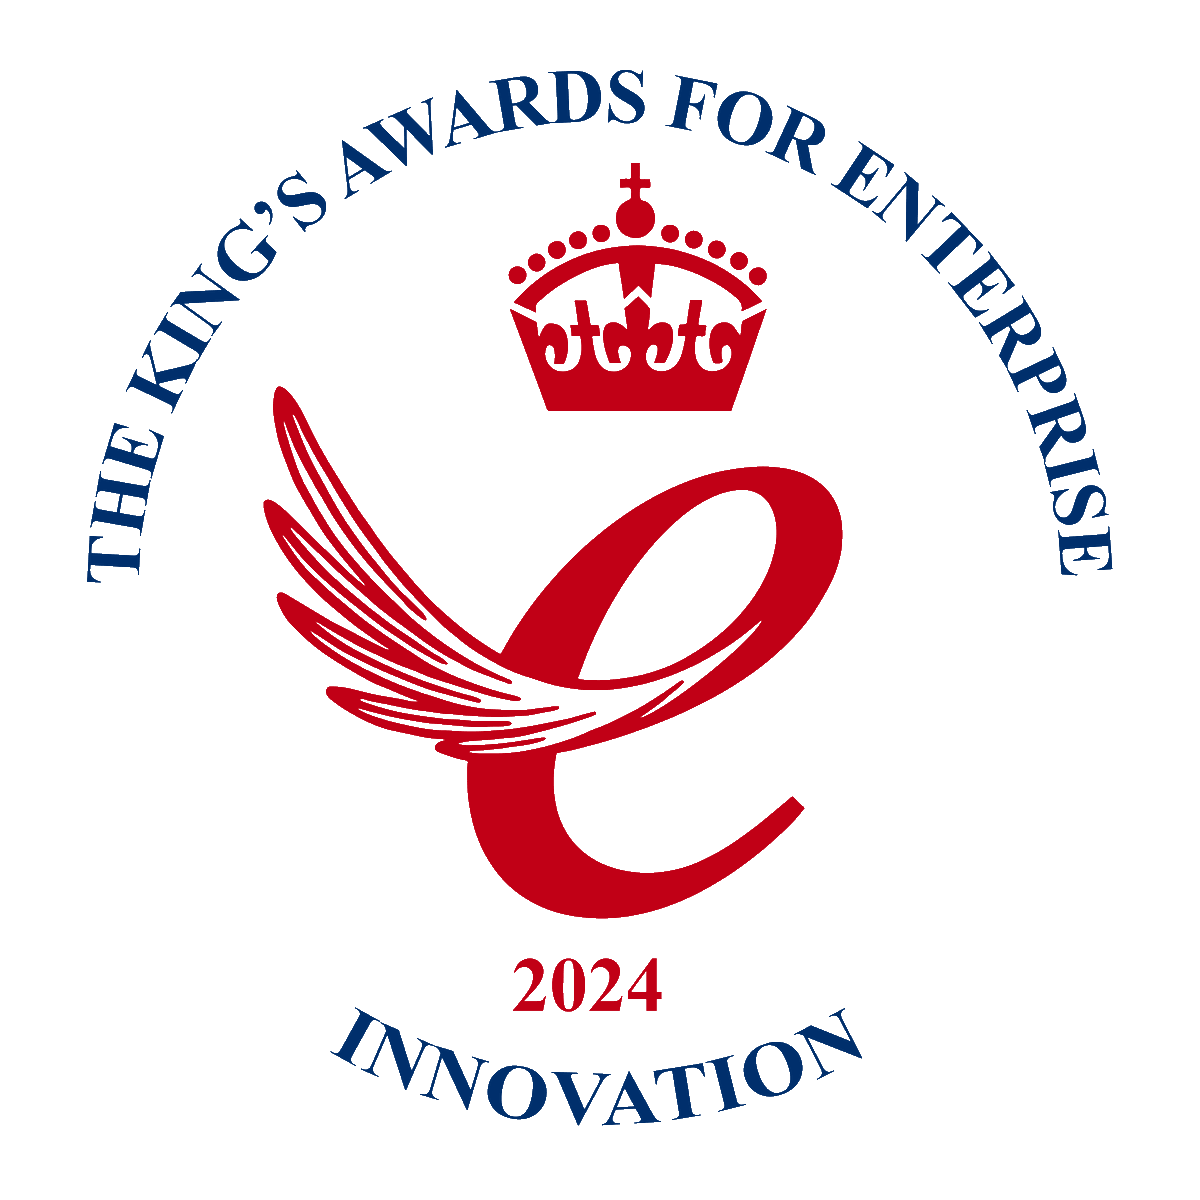 Terumo Aortic wins prestigious King’s Award for Enterprise in Innovation category for custom solutions programme for treating complex aortic disease (subject to local regulatory approval). #KingsAwards #TerumoAortic #Innovation View press release here: loom.ly/TD2Y2fg